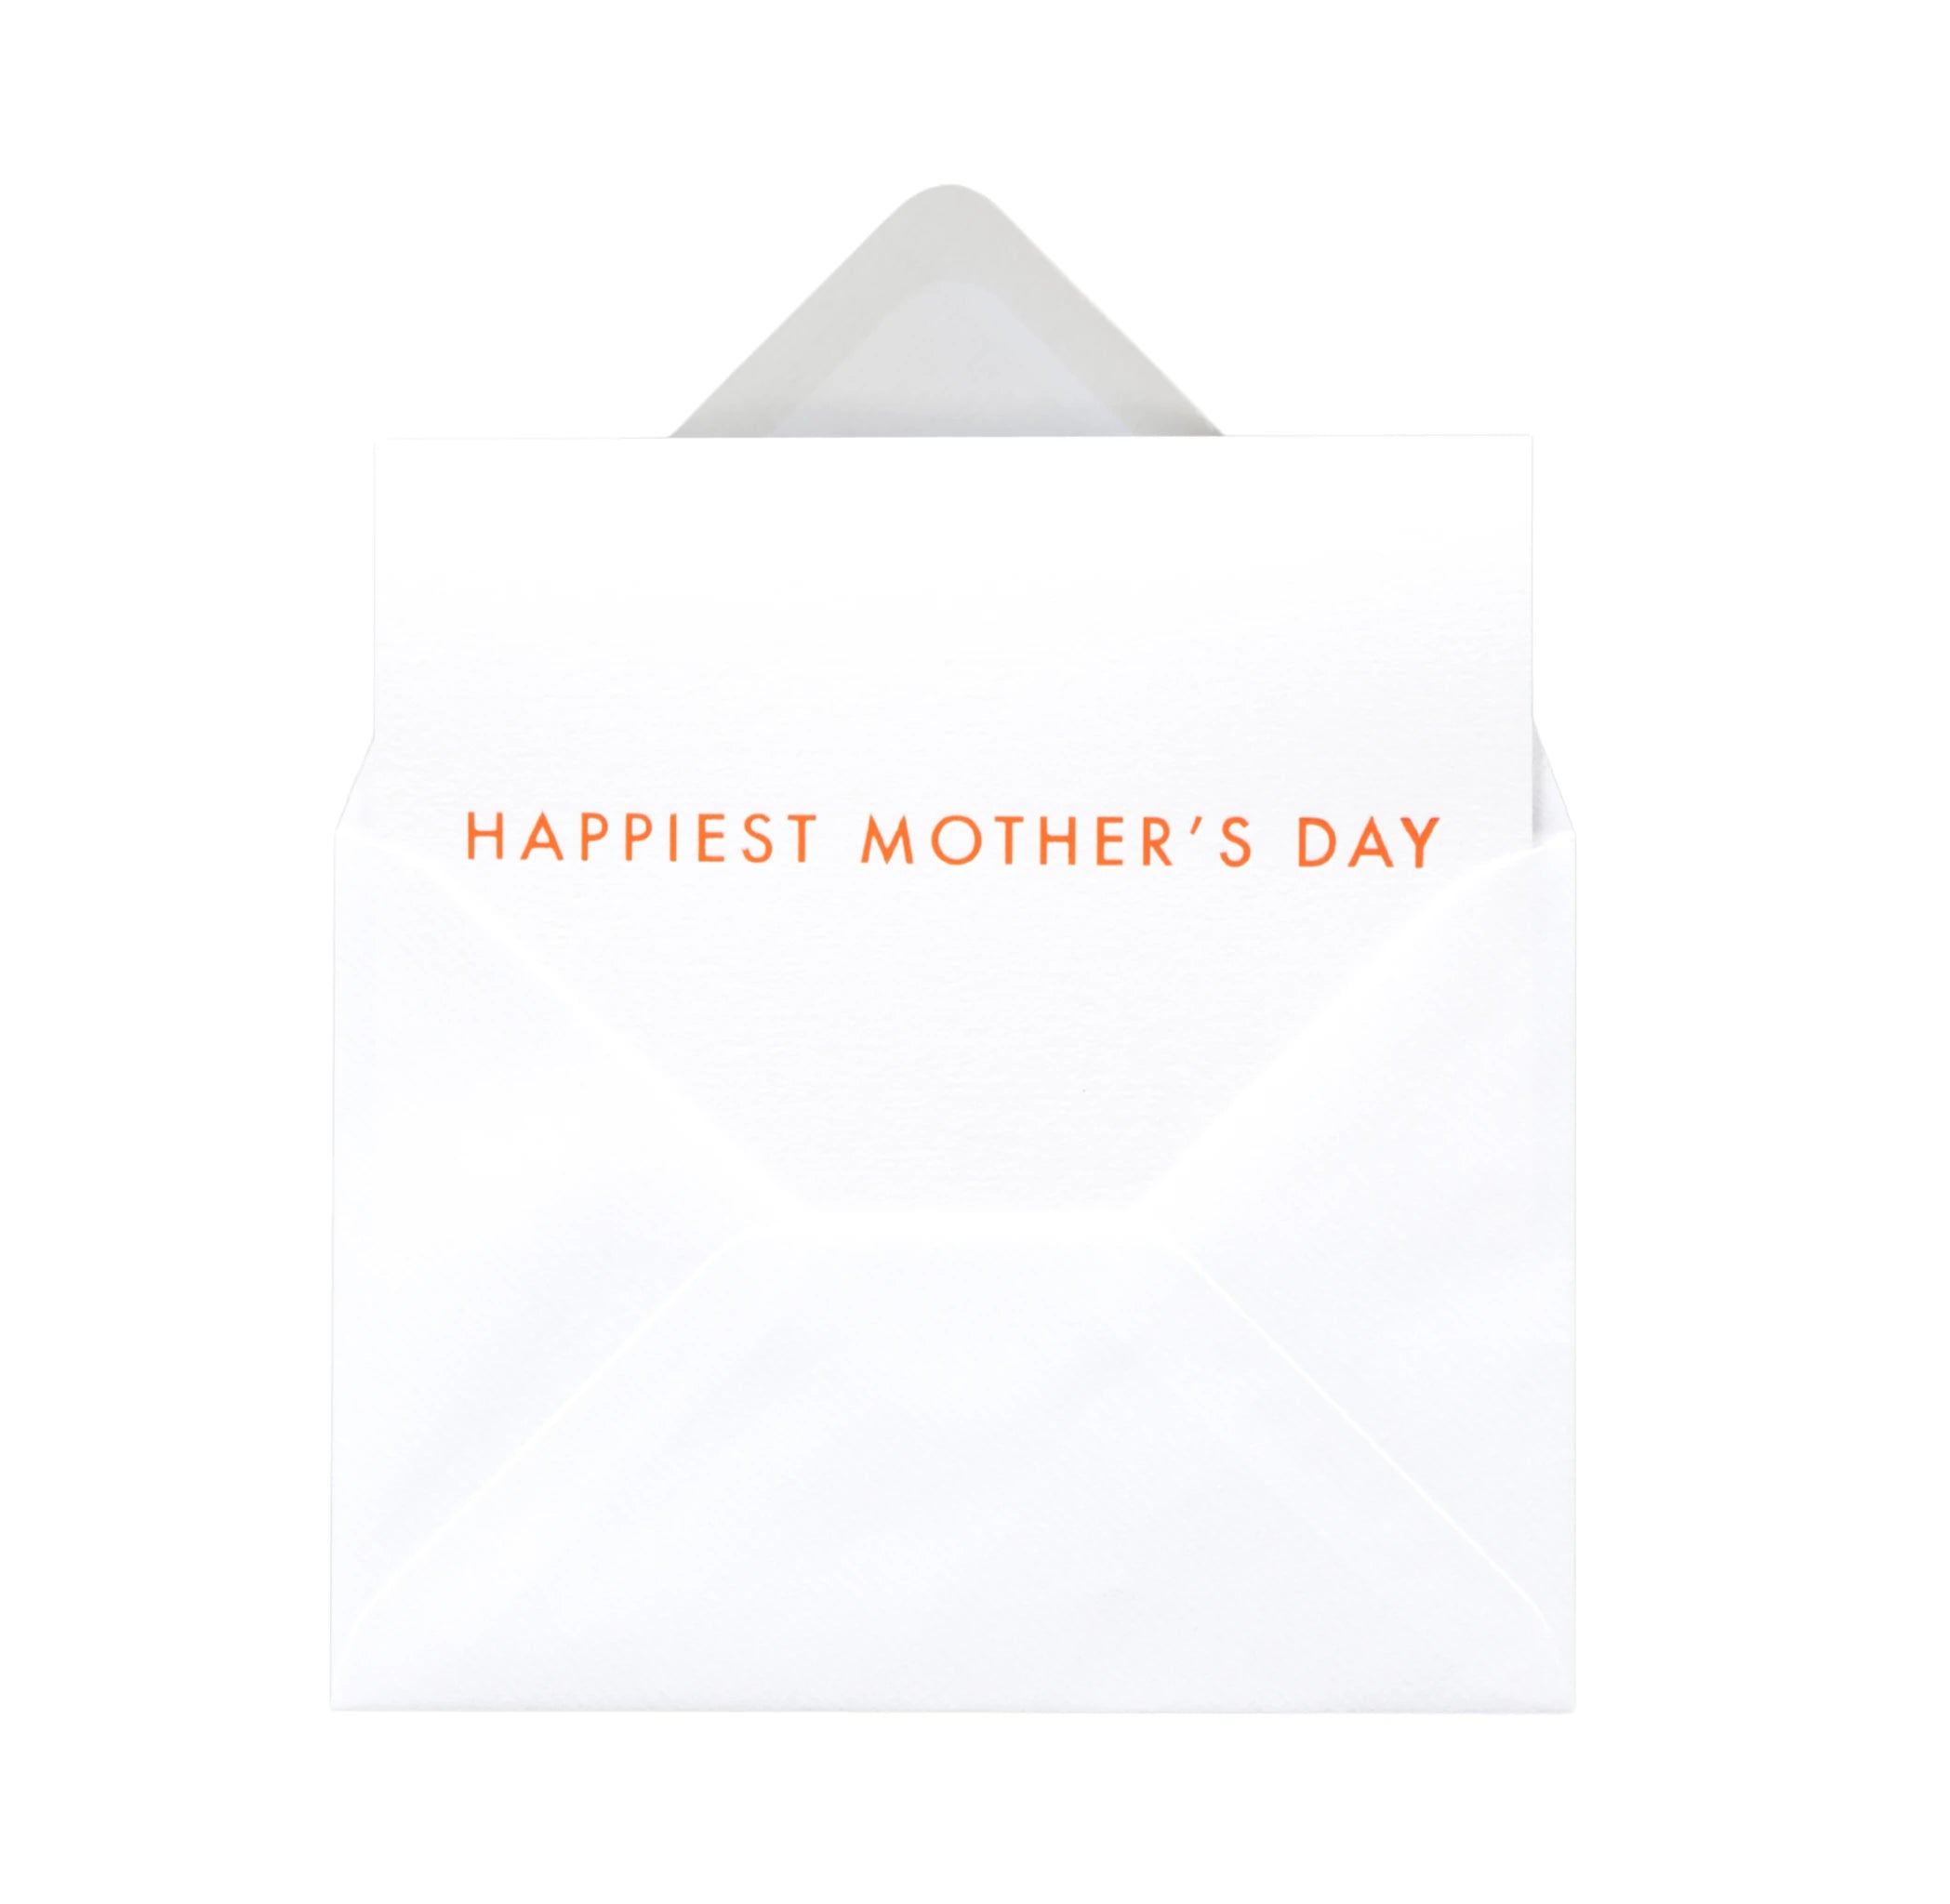 Happiest Mother's Day by Ola - Lifestory